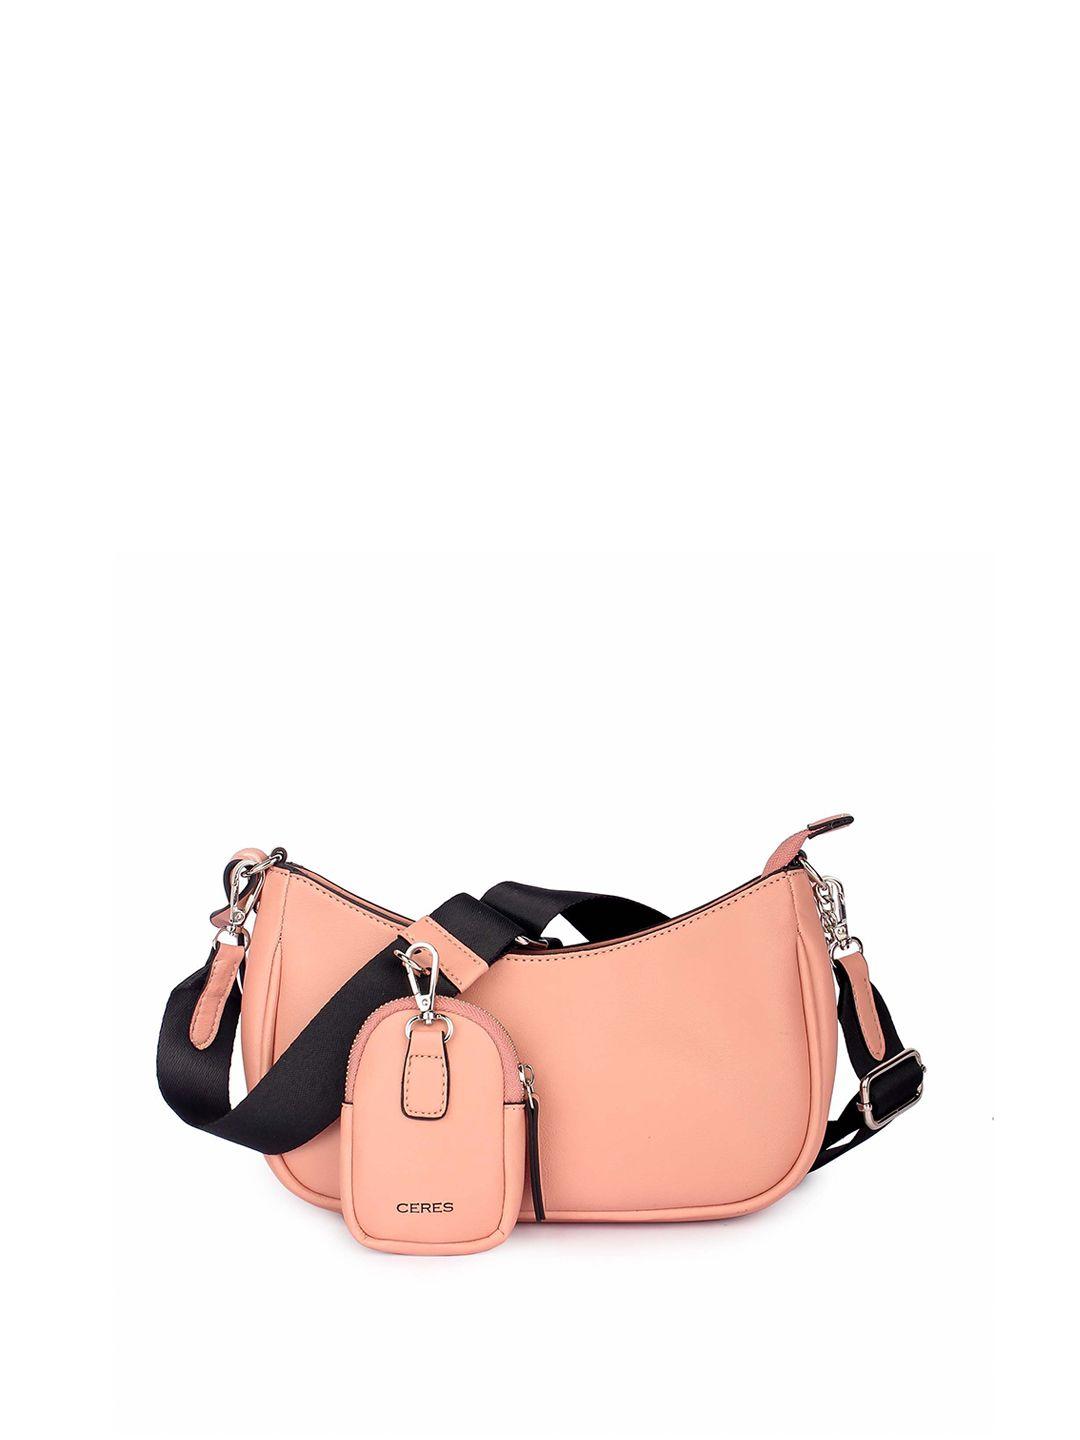 ceres colourblocked leather structured satchel with tasselled